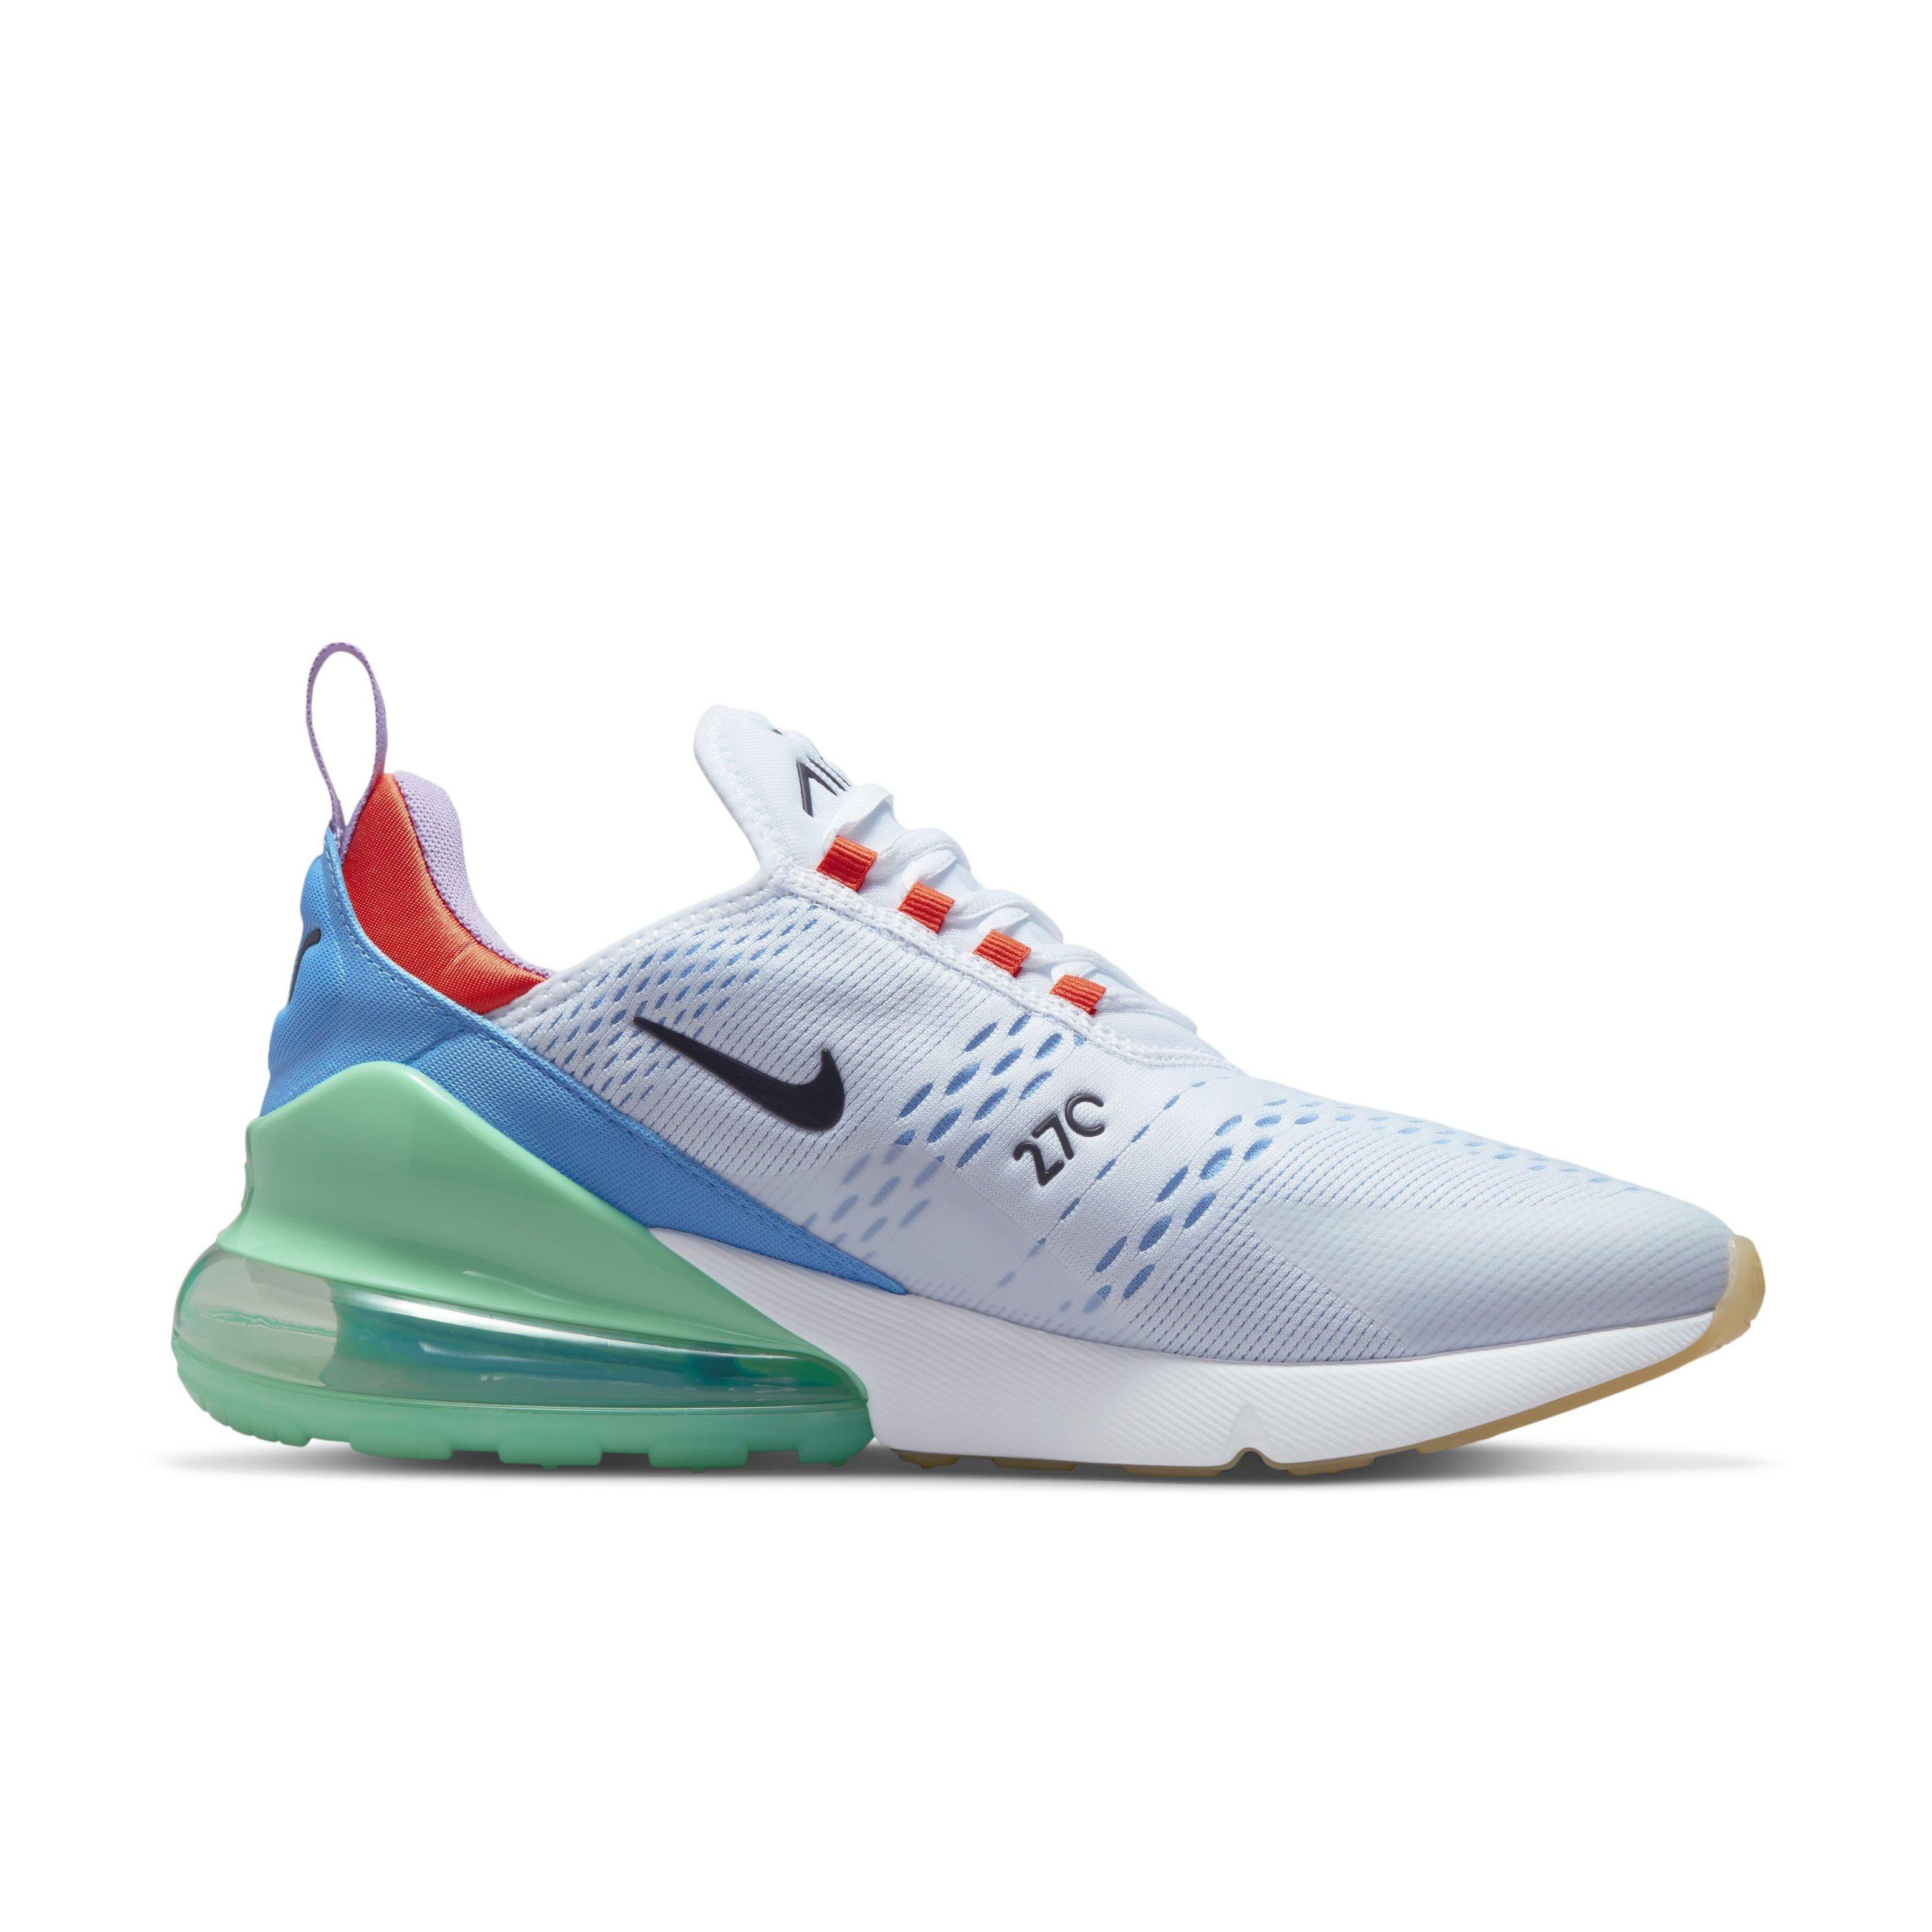 white and turquoise air max 270